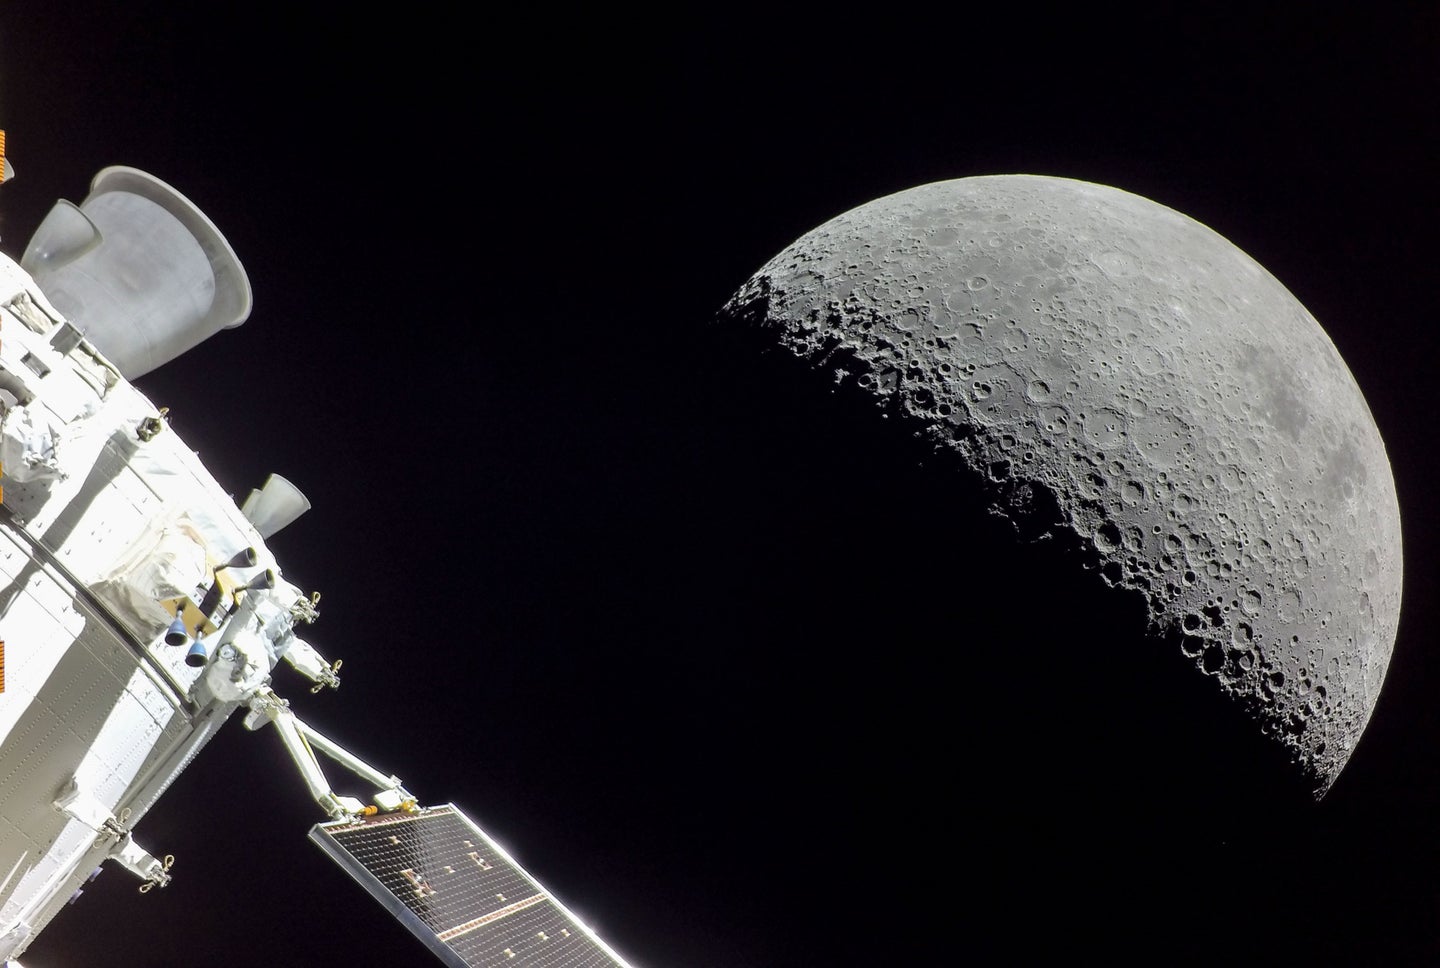 Orion space capsule capturing surface of moon during NASA Artemis I mission